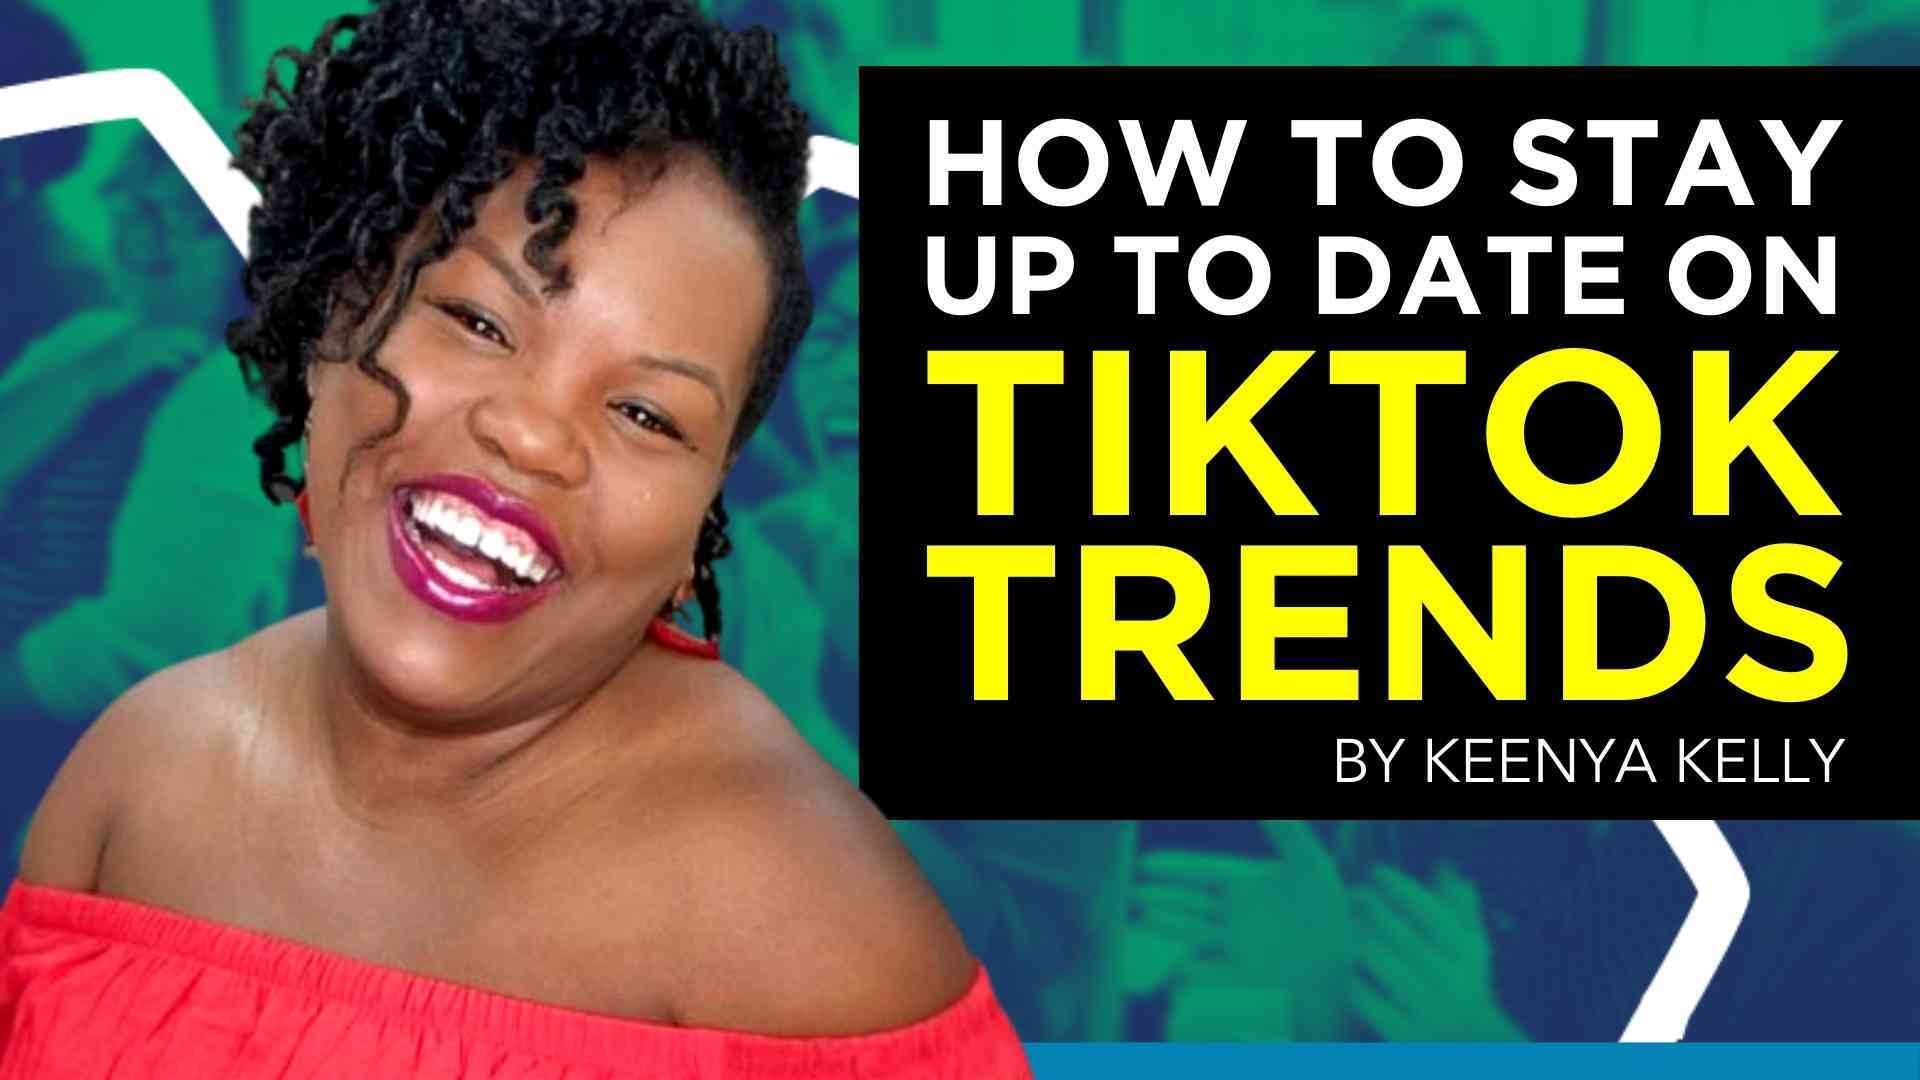 How to Stay Up to Date on TikTok Trends